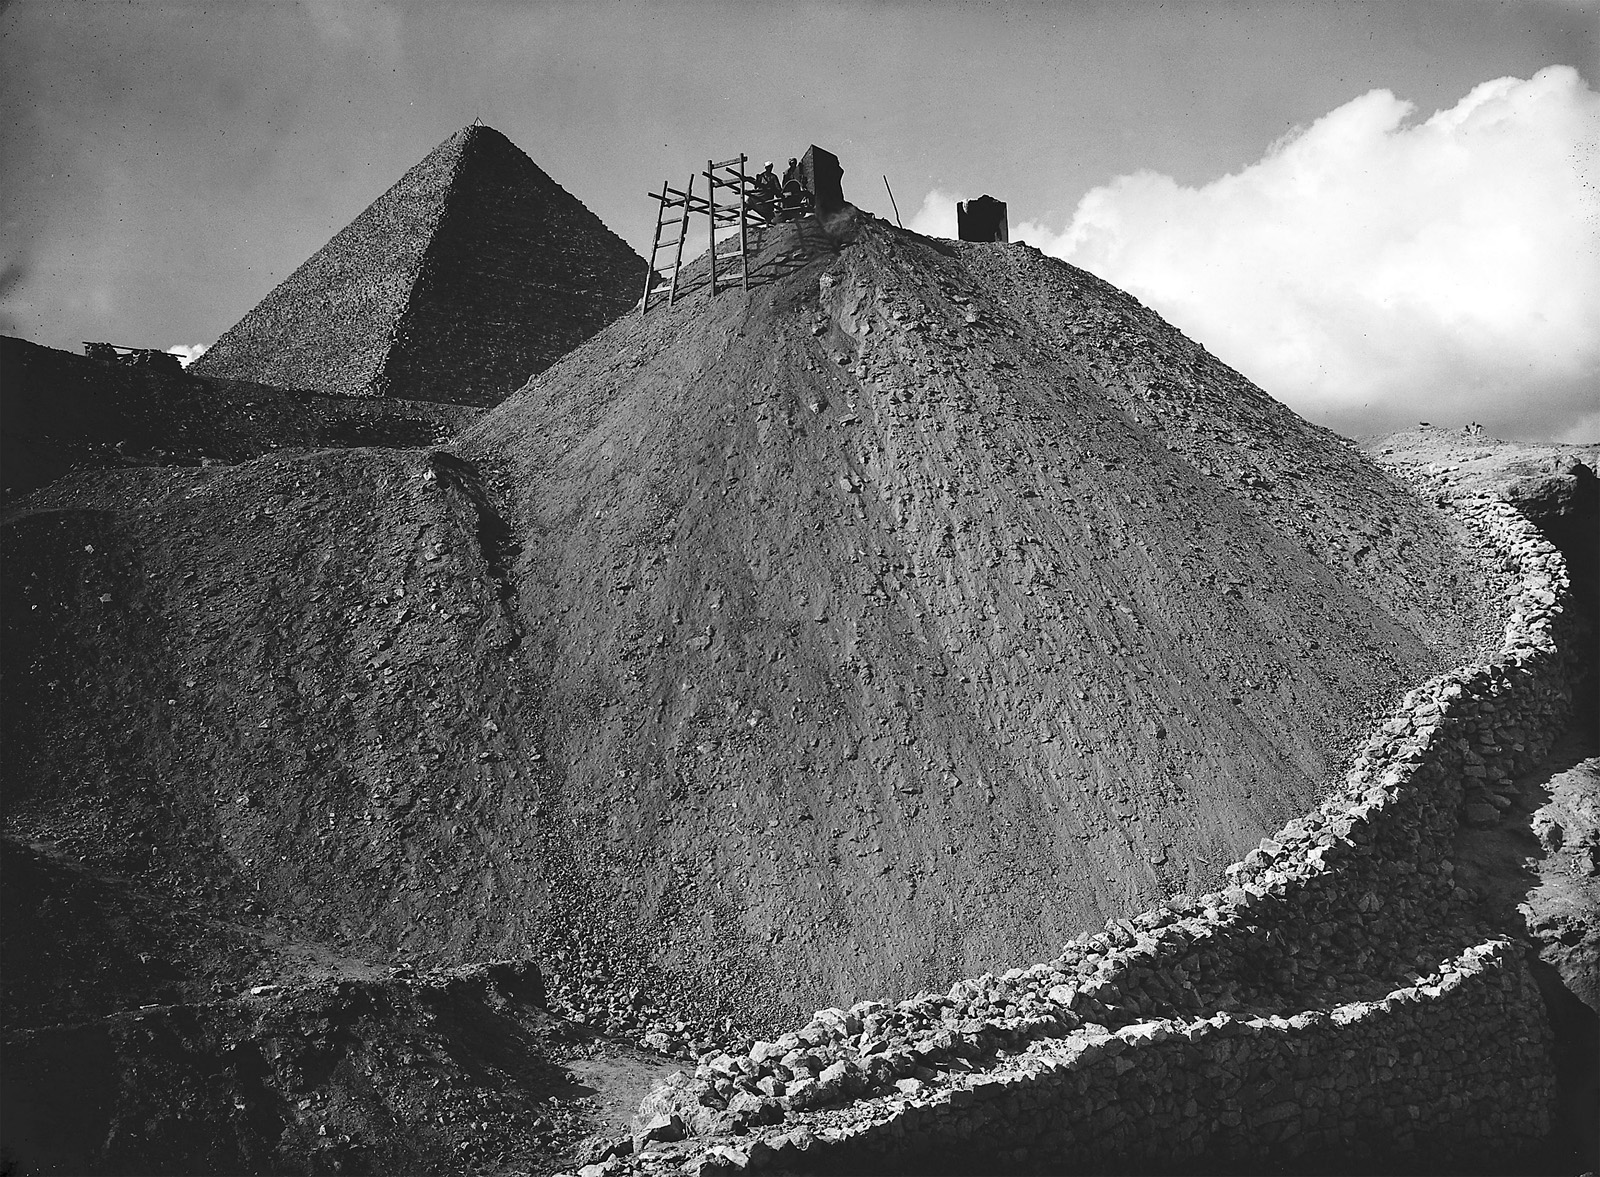 In January 1930 Ibrahim photographed an excavation mound at Giza with the Great Pyramid of Khufu peering from behind, rising only slightly taller in the frame, juxtaposing past and present. By this time Ibrahim’s two decades of experience behind the lens showed in his articulate visual storytelling through composition and association, as well as dramatic contrasts of light and shadow, and in his expert control of the tonal ranges within images that he produced in the field camp’s darkroom.